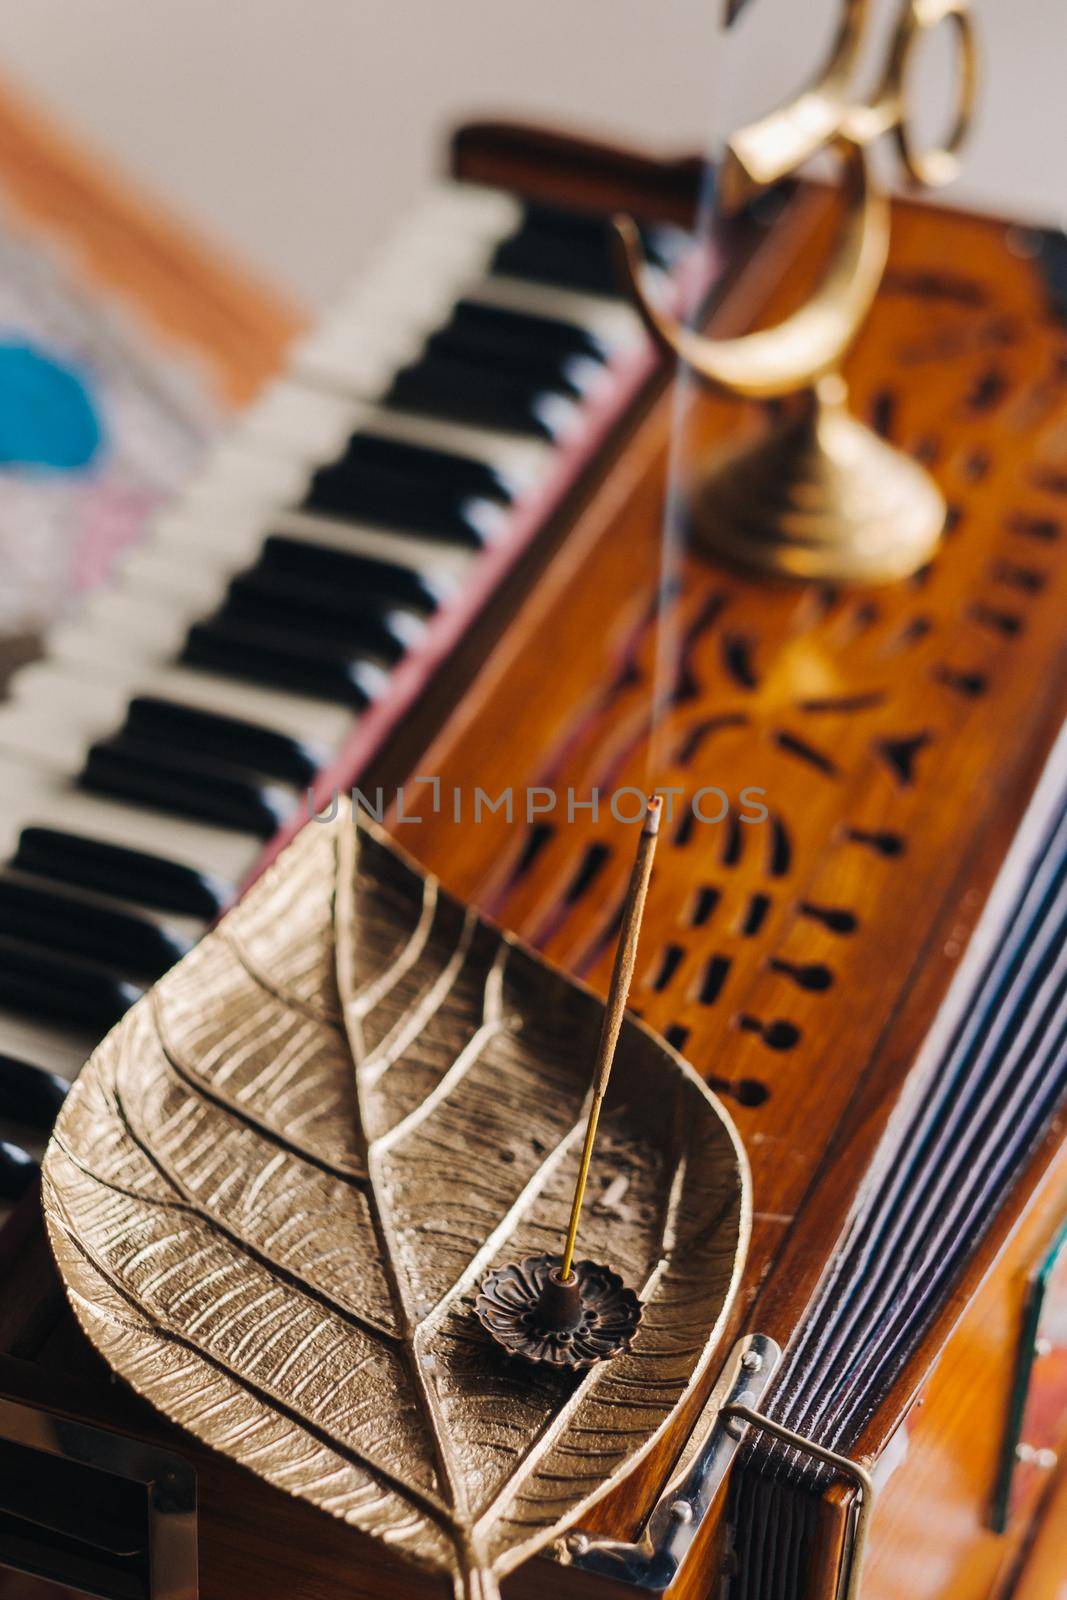 harmonium during the practice of kundalini yoga and the incense standing on it.